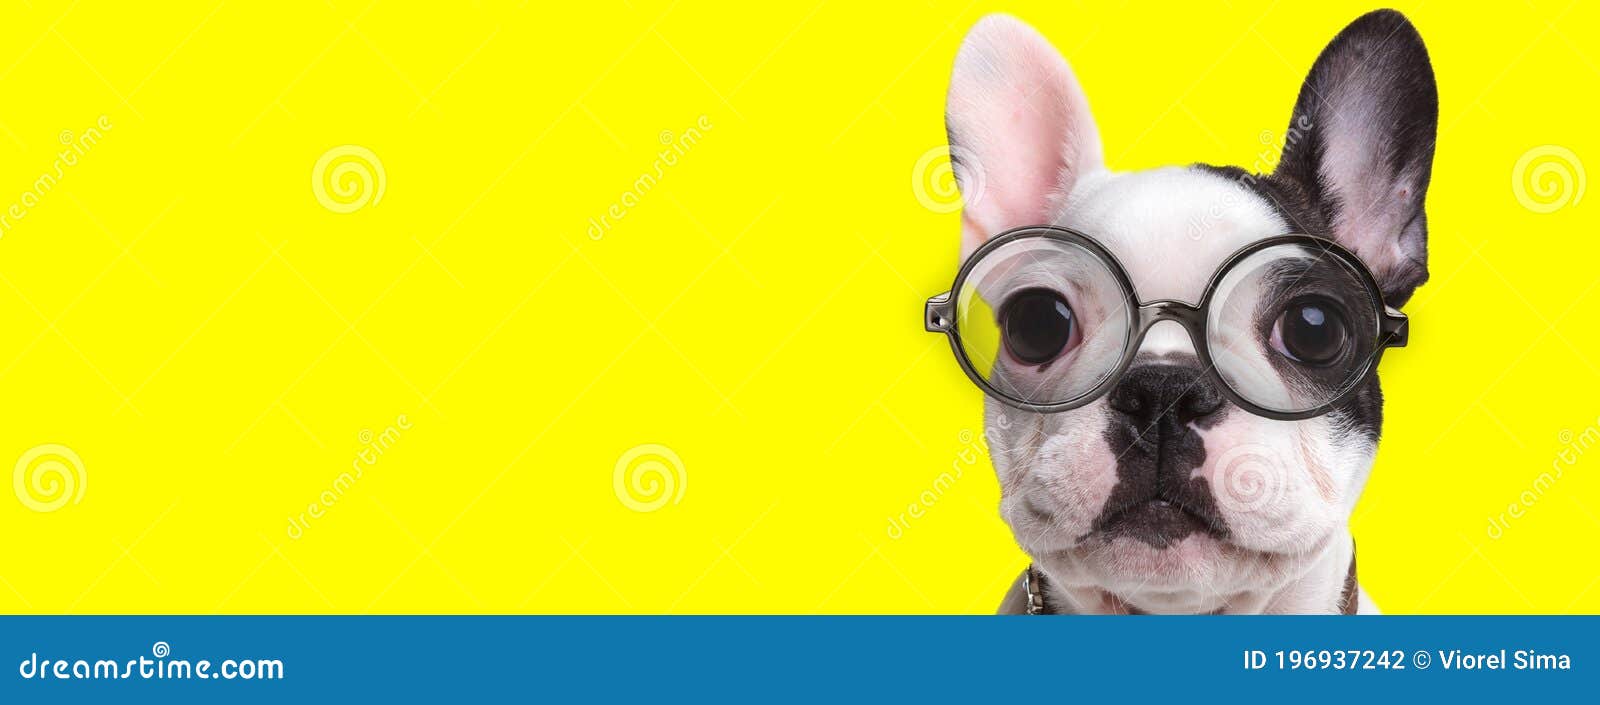 adorable frenchie dog wearing glasses and collar